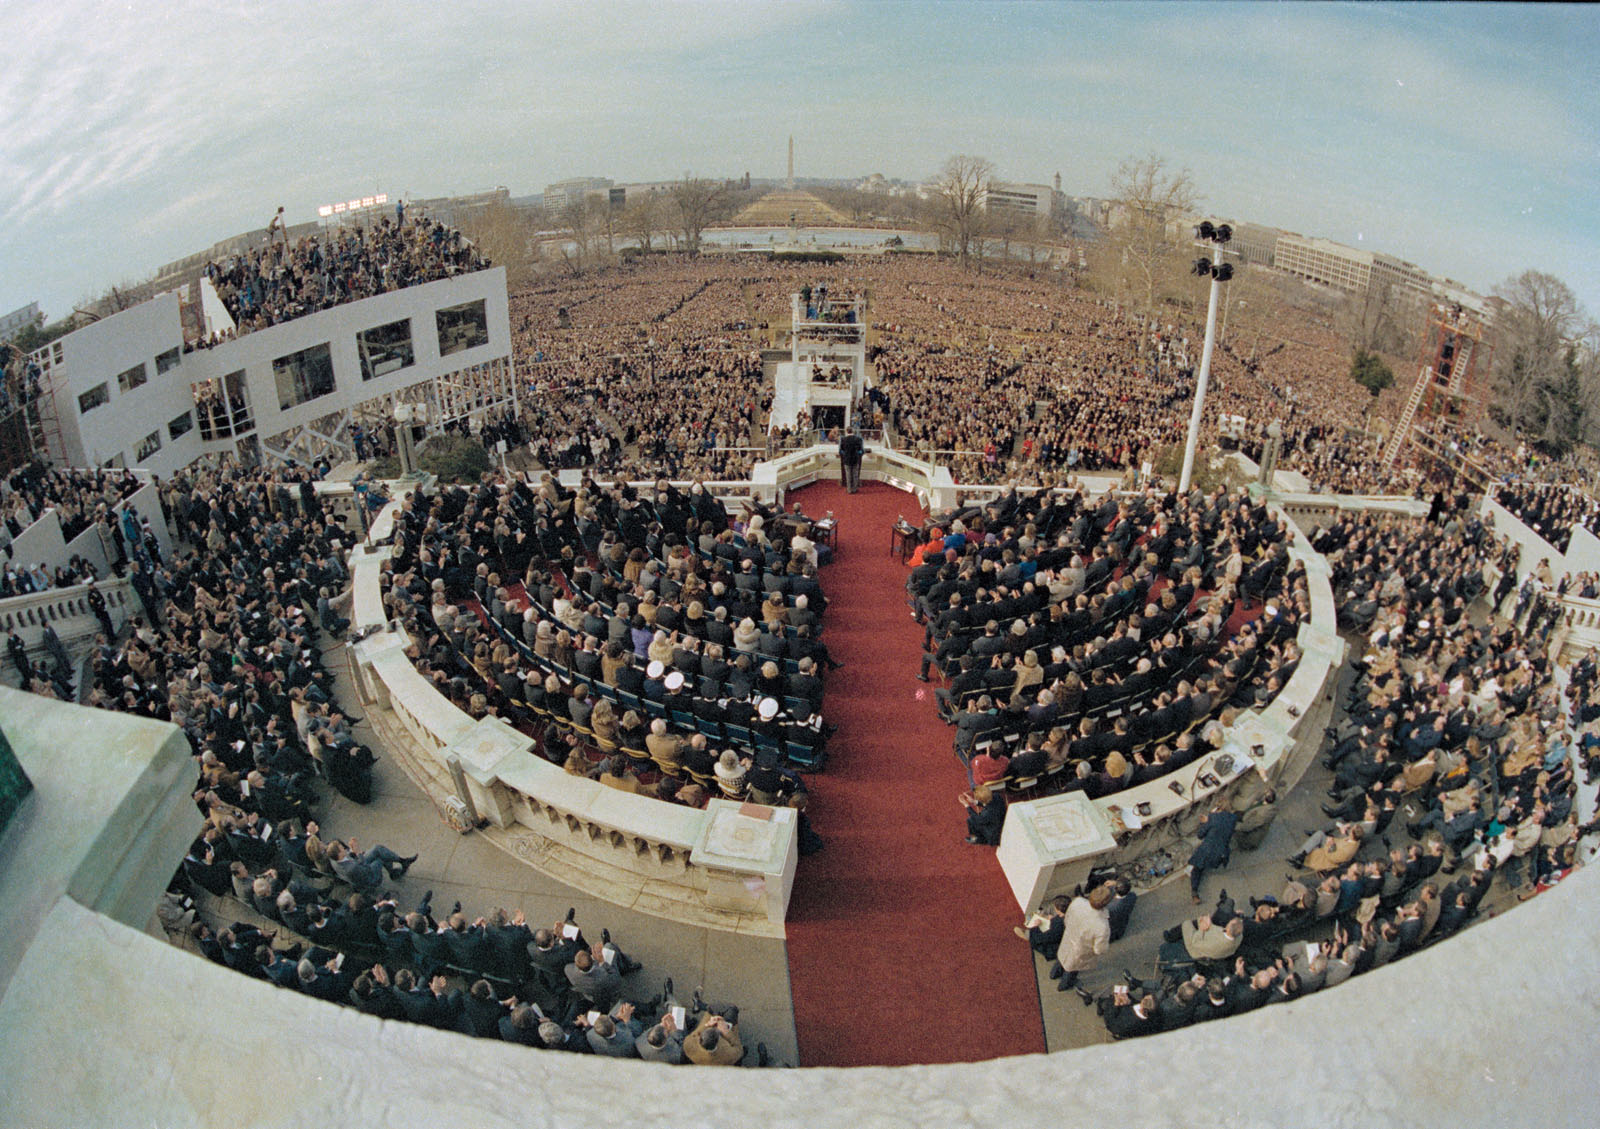 ** FILE ** In this Jan. 20, 1981 file photo, shows a wide angle view from the Capitol balcony as President Ronald Reagan, visible at center, addresses the nation following his swearing-in ceremony in Washington.  President-elect Barack Obama's inauguration is expected to draw 1 million-plus to the capital, and already some lawmakers have stopped taking ticket requests and hotels have booked up.  (AP Photo, File)